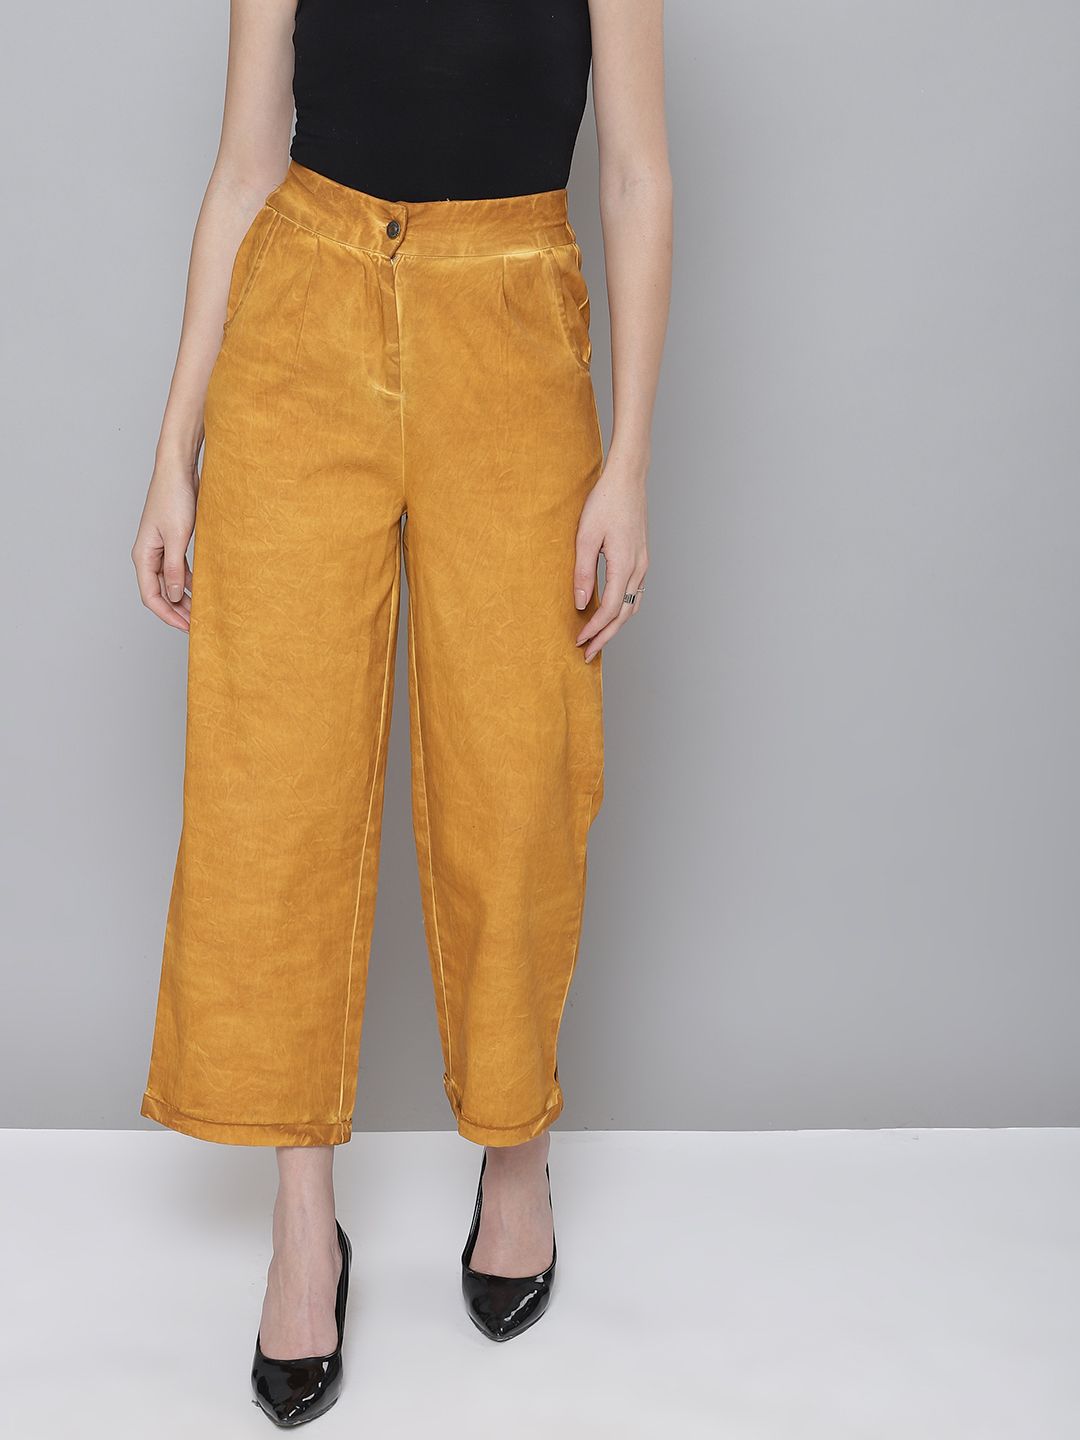 SASSAFRAS Women Mustard Yellow Twill Cotton Faded Culottes Trousers Price in India